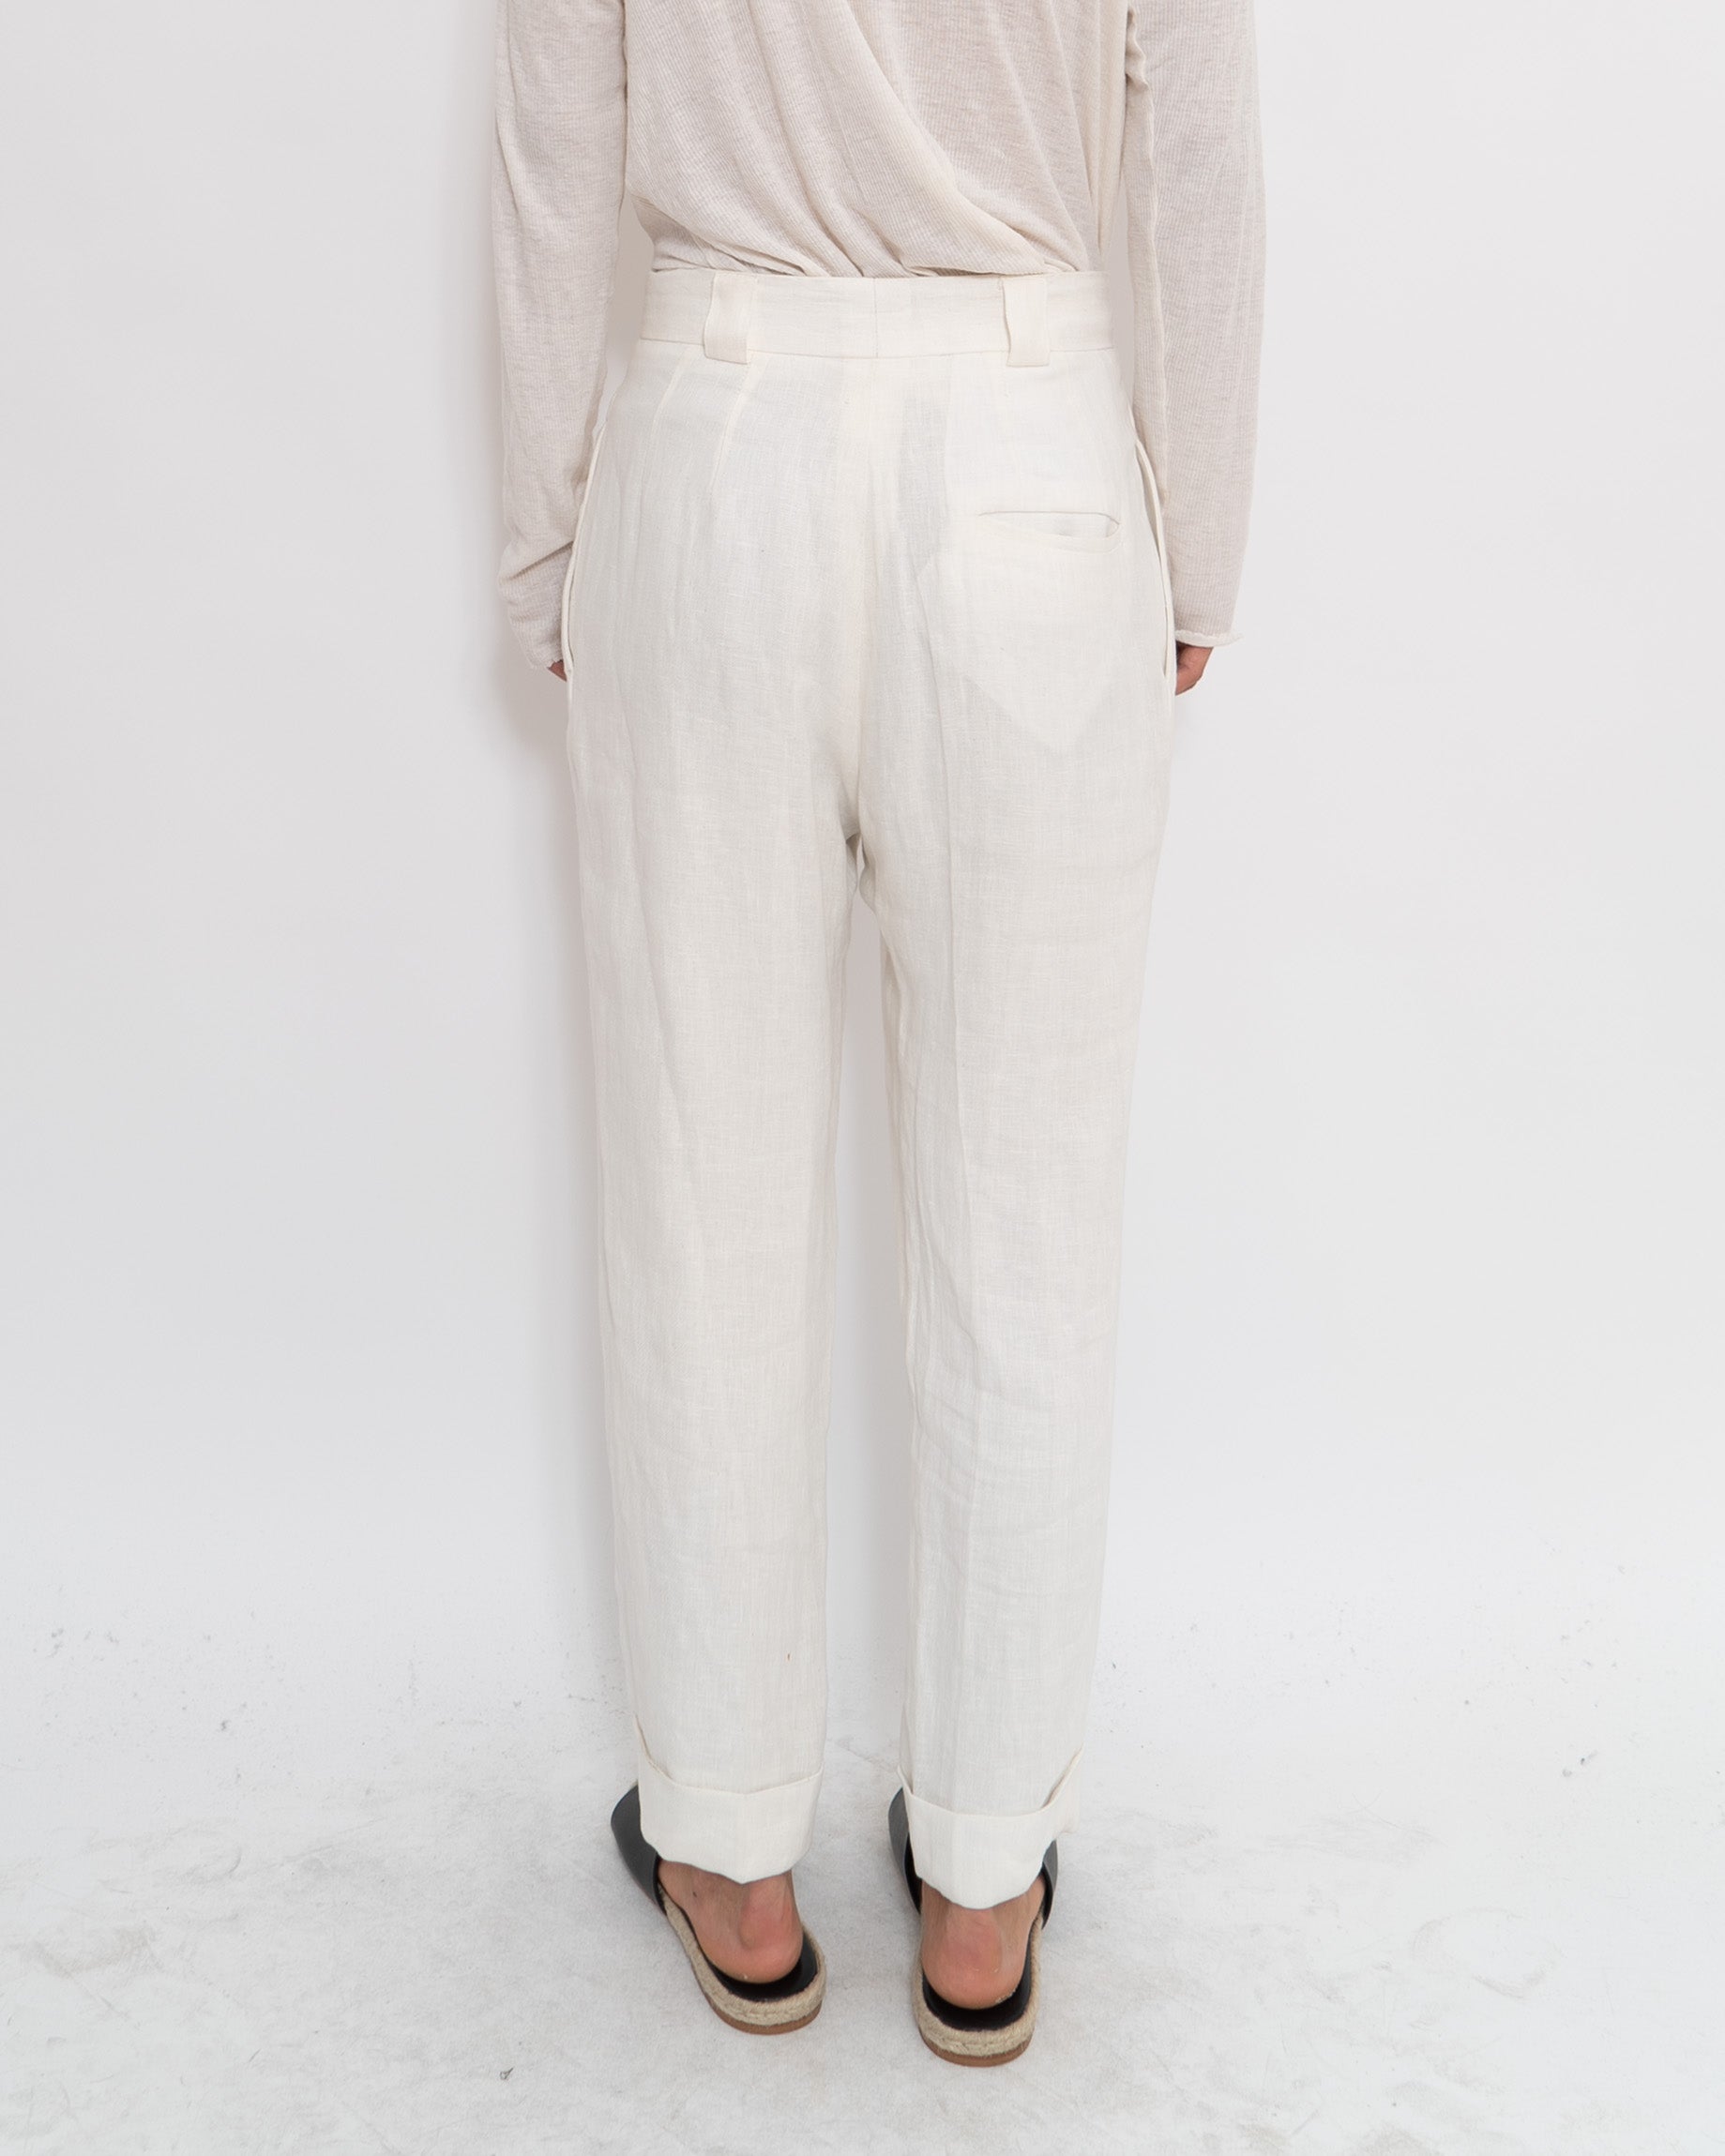 SS17 Agrippina Ivory Trousers Sample